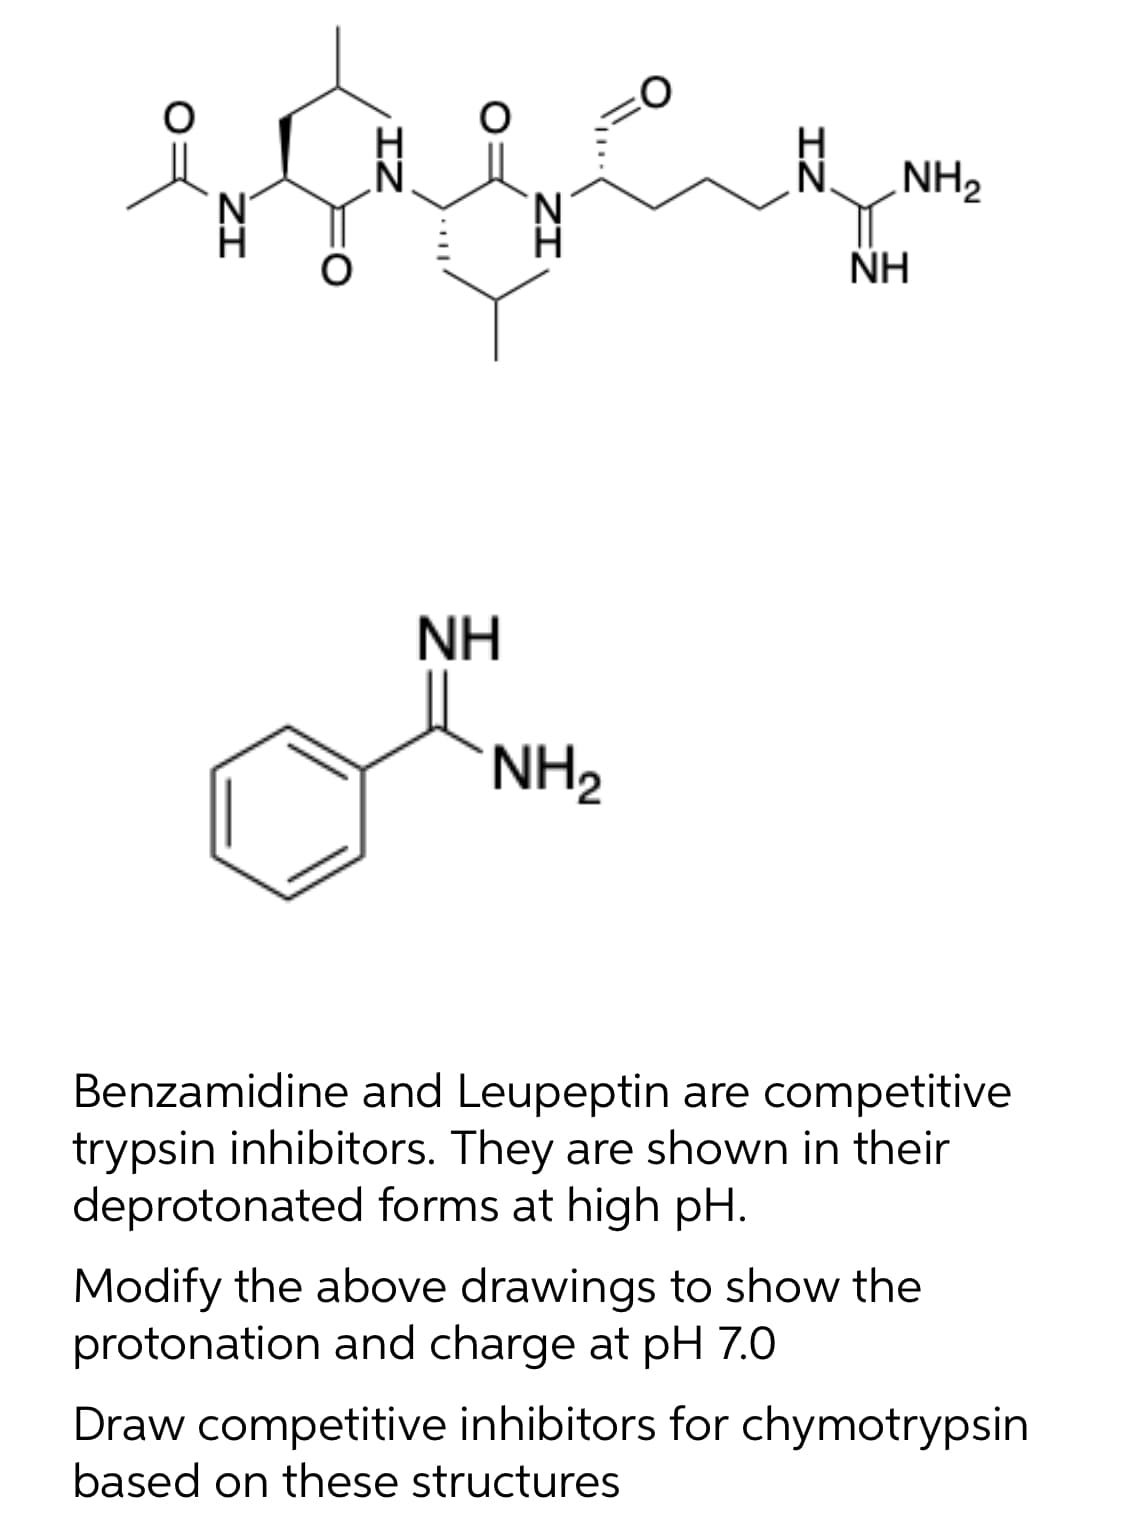 NH2
'N.
NH
NH
NH2
Benzamidine and Leupeptin are competitive
trypsin inhibitors. They are shown in their
deprotonated forms at high pH.
Modify the above drawings to show the
protonation and charge at pH 7.0
Draw competitive inhibitors for chymotrypsin
based on these structures
IZ
ZI
ZI
